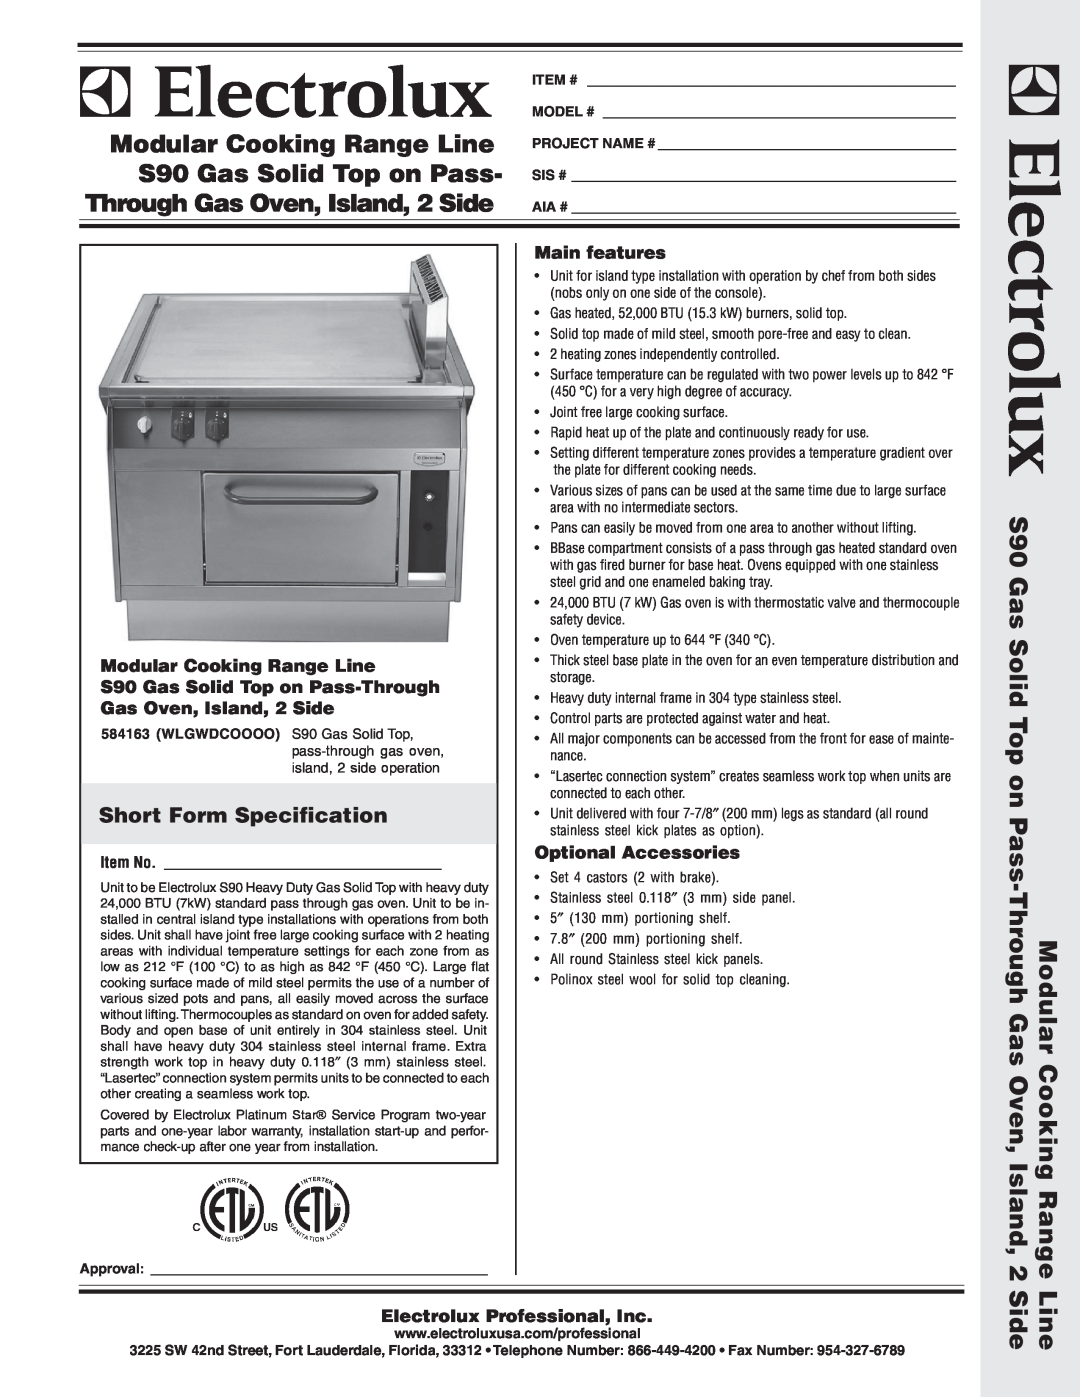 Electrolux 584163 warranty Short Form Specification, Modular Cooking Range Line, Main features, Optional Accessories 